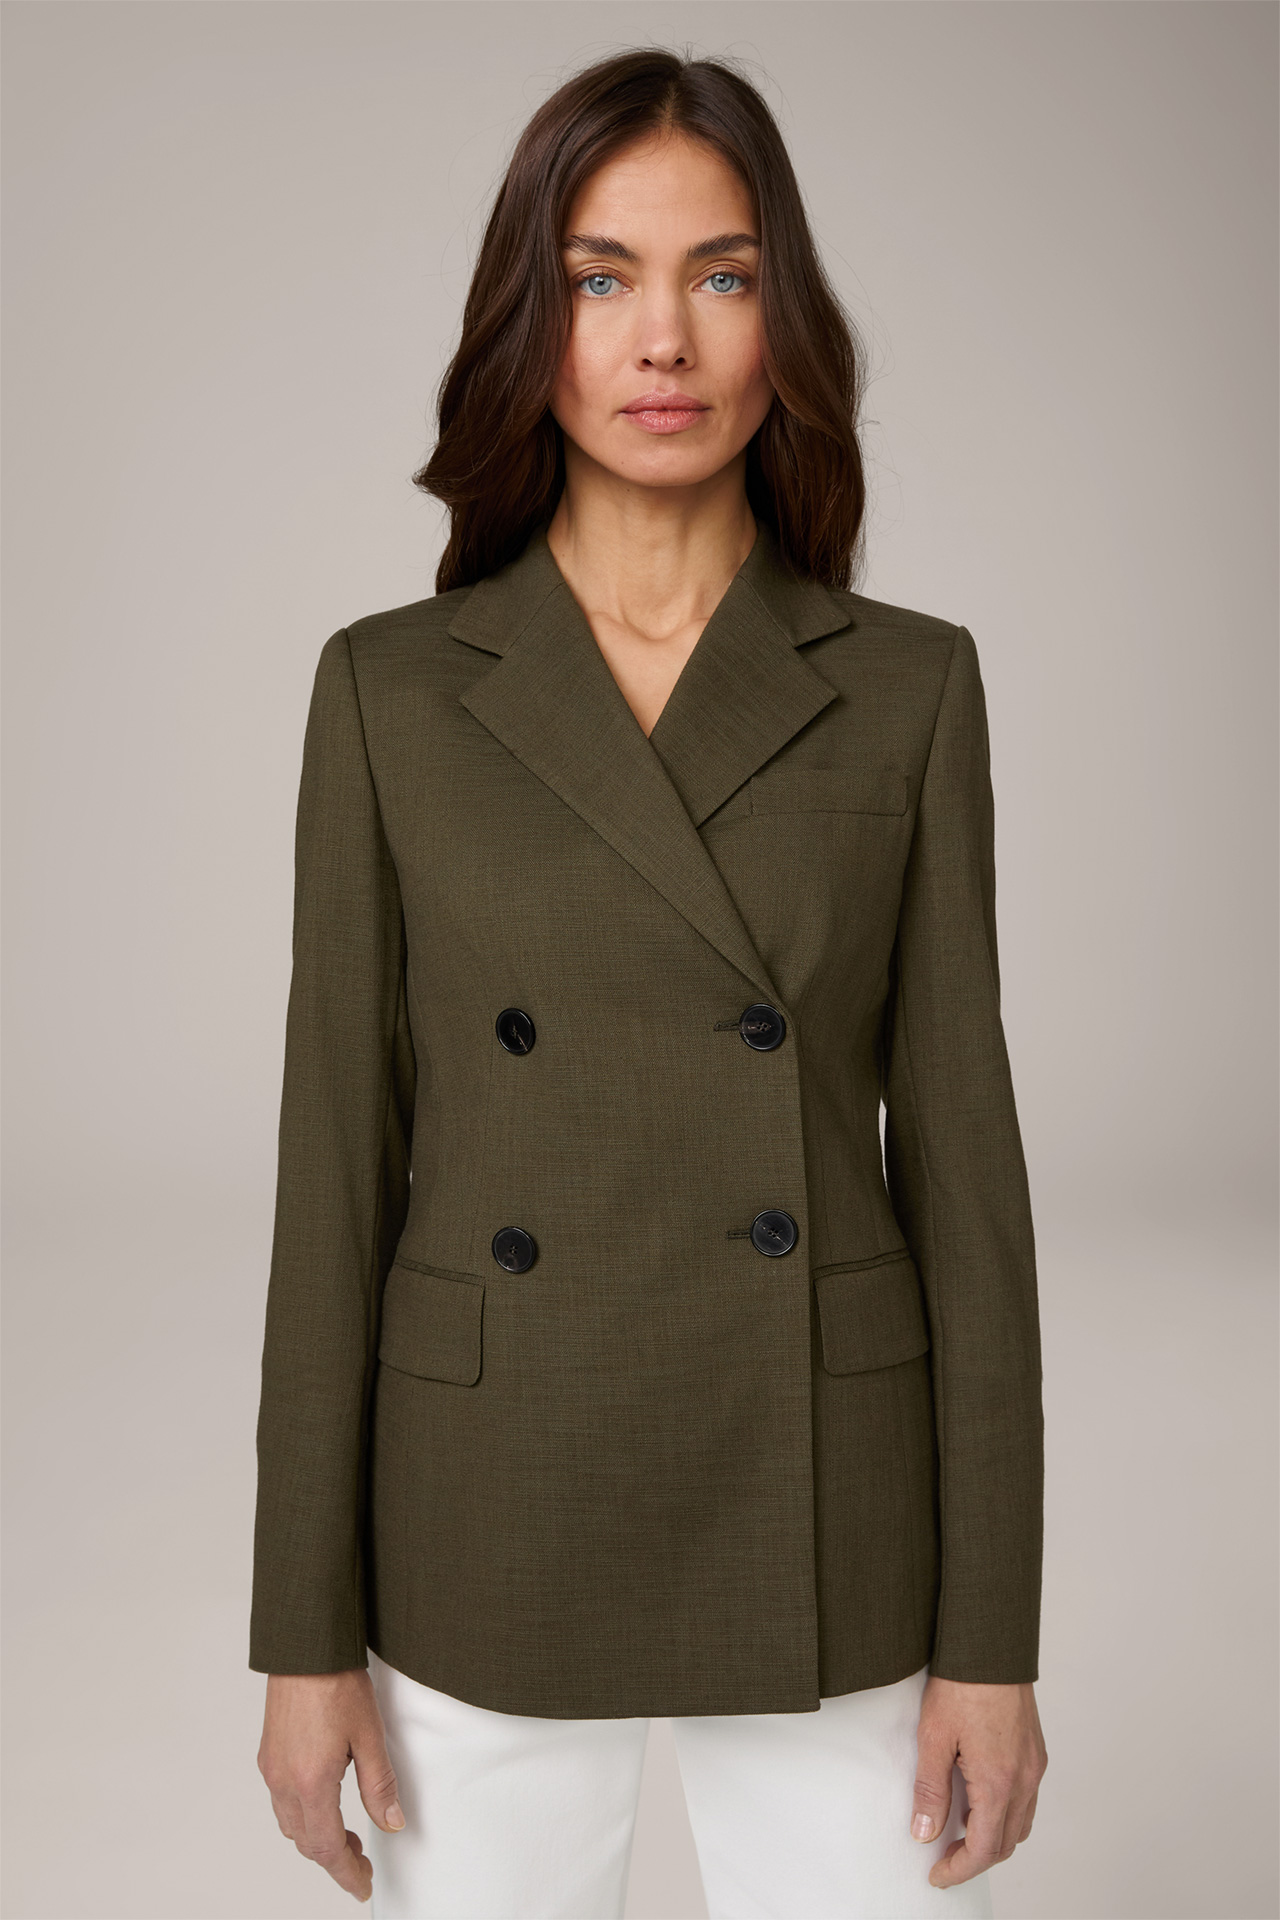 Cotton Mix Double-Breasted Blazer in Olive